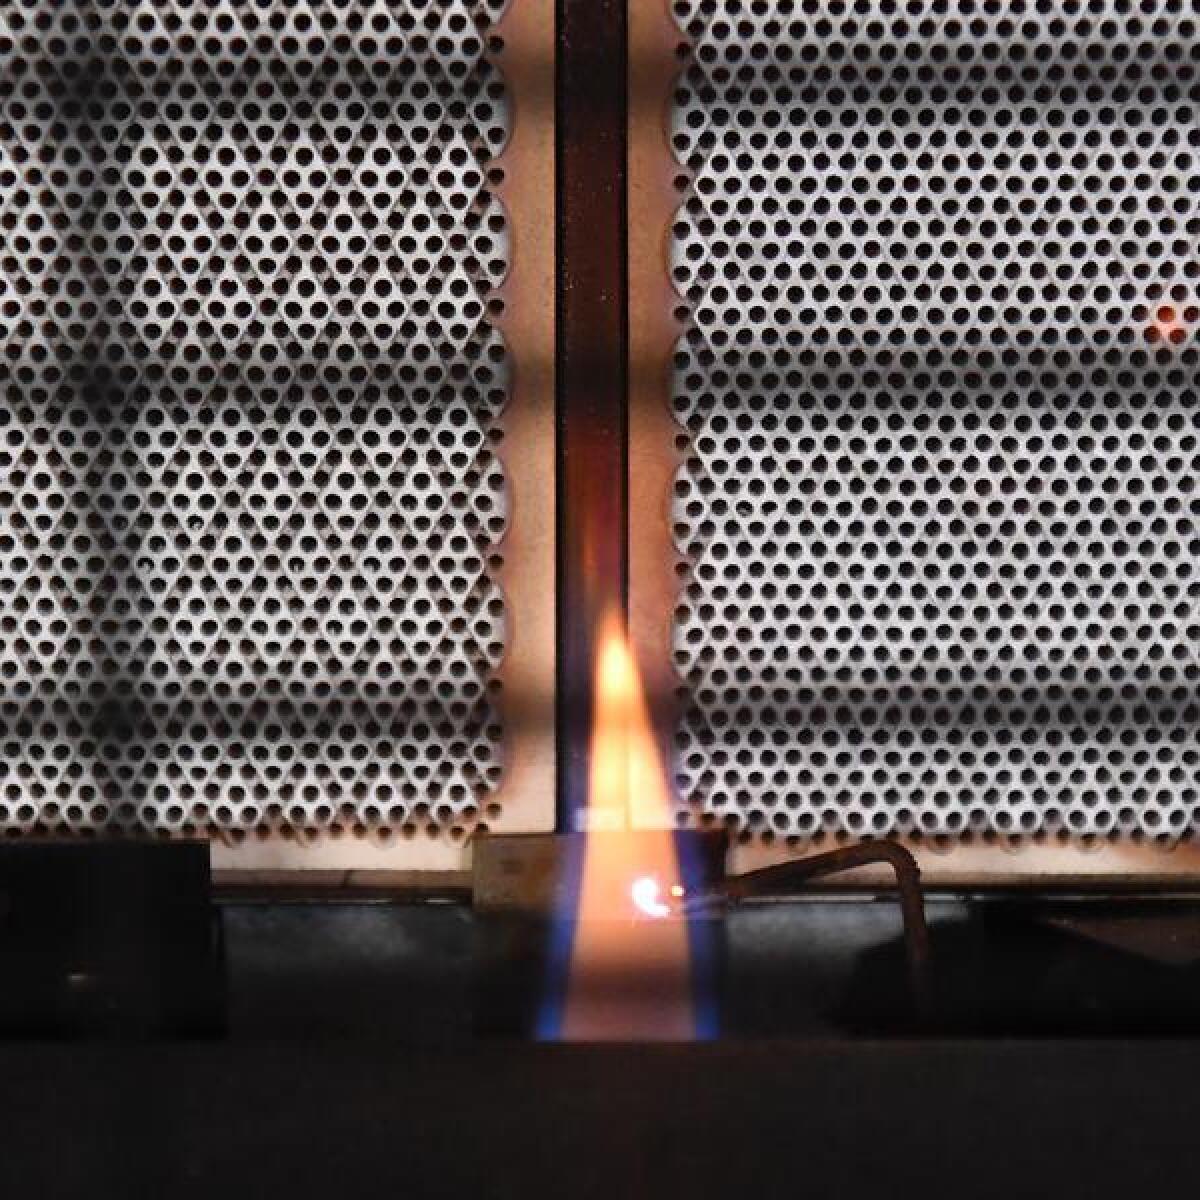 A gas heater is lit in a lounge room in Sydney (file image)